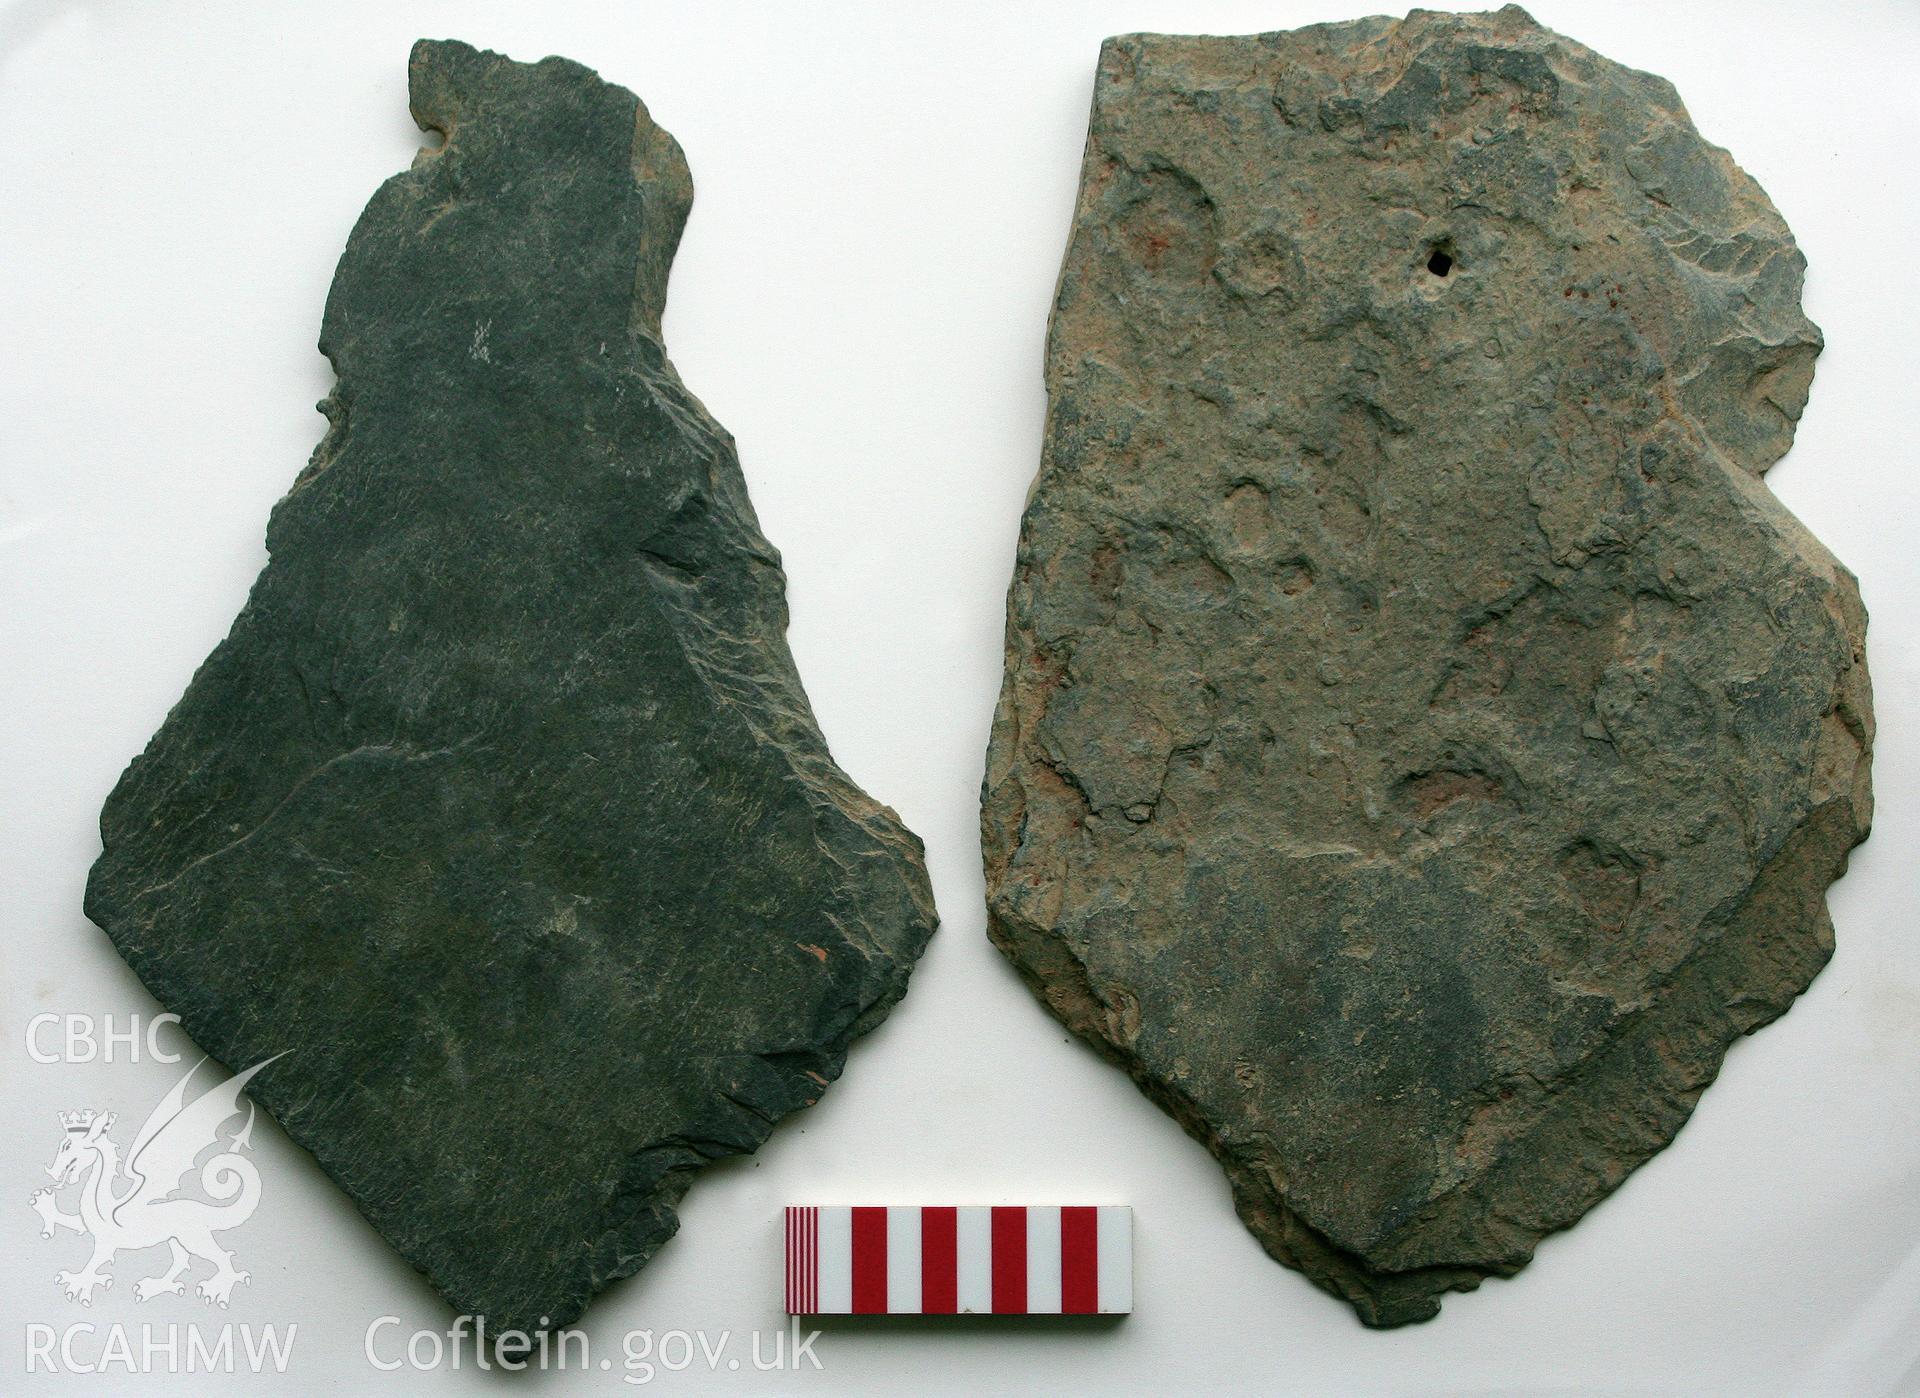 Abermagwr Roman villa excavations, July 2010. Two pentagonally-cut stone roofing tiles recovered from the site.